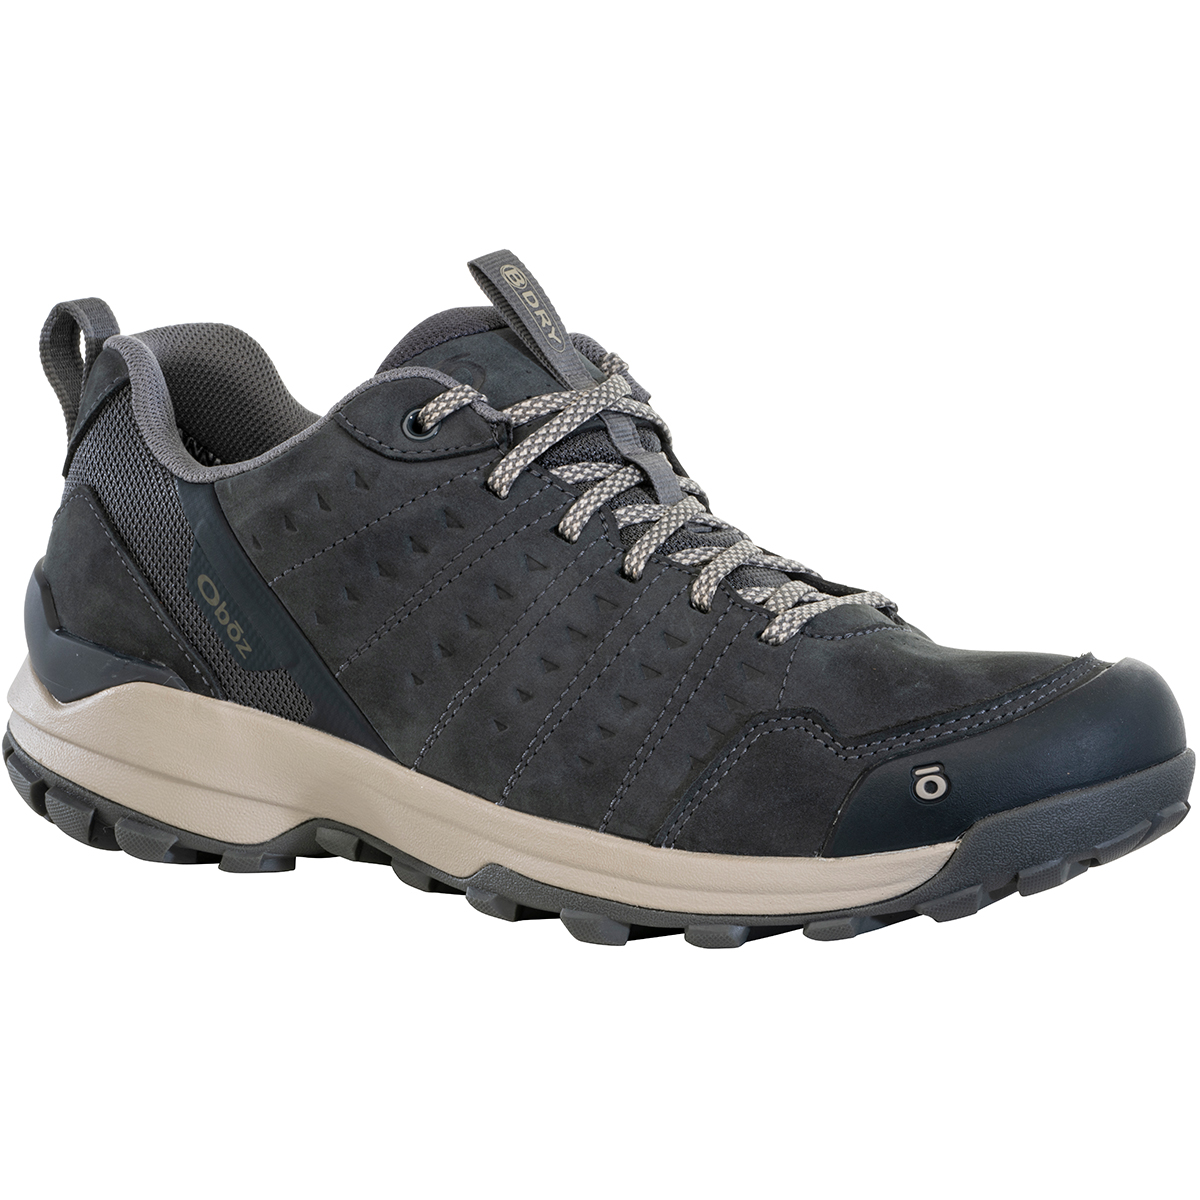 Oboz Men's Sypes Low Leather B-Dry Hiking Shoe